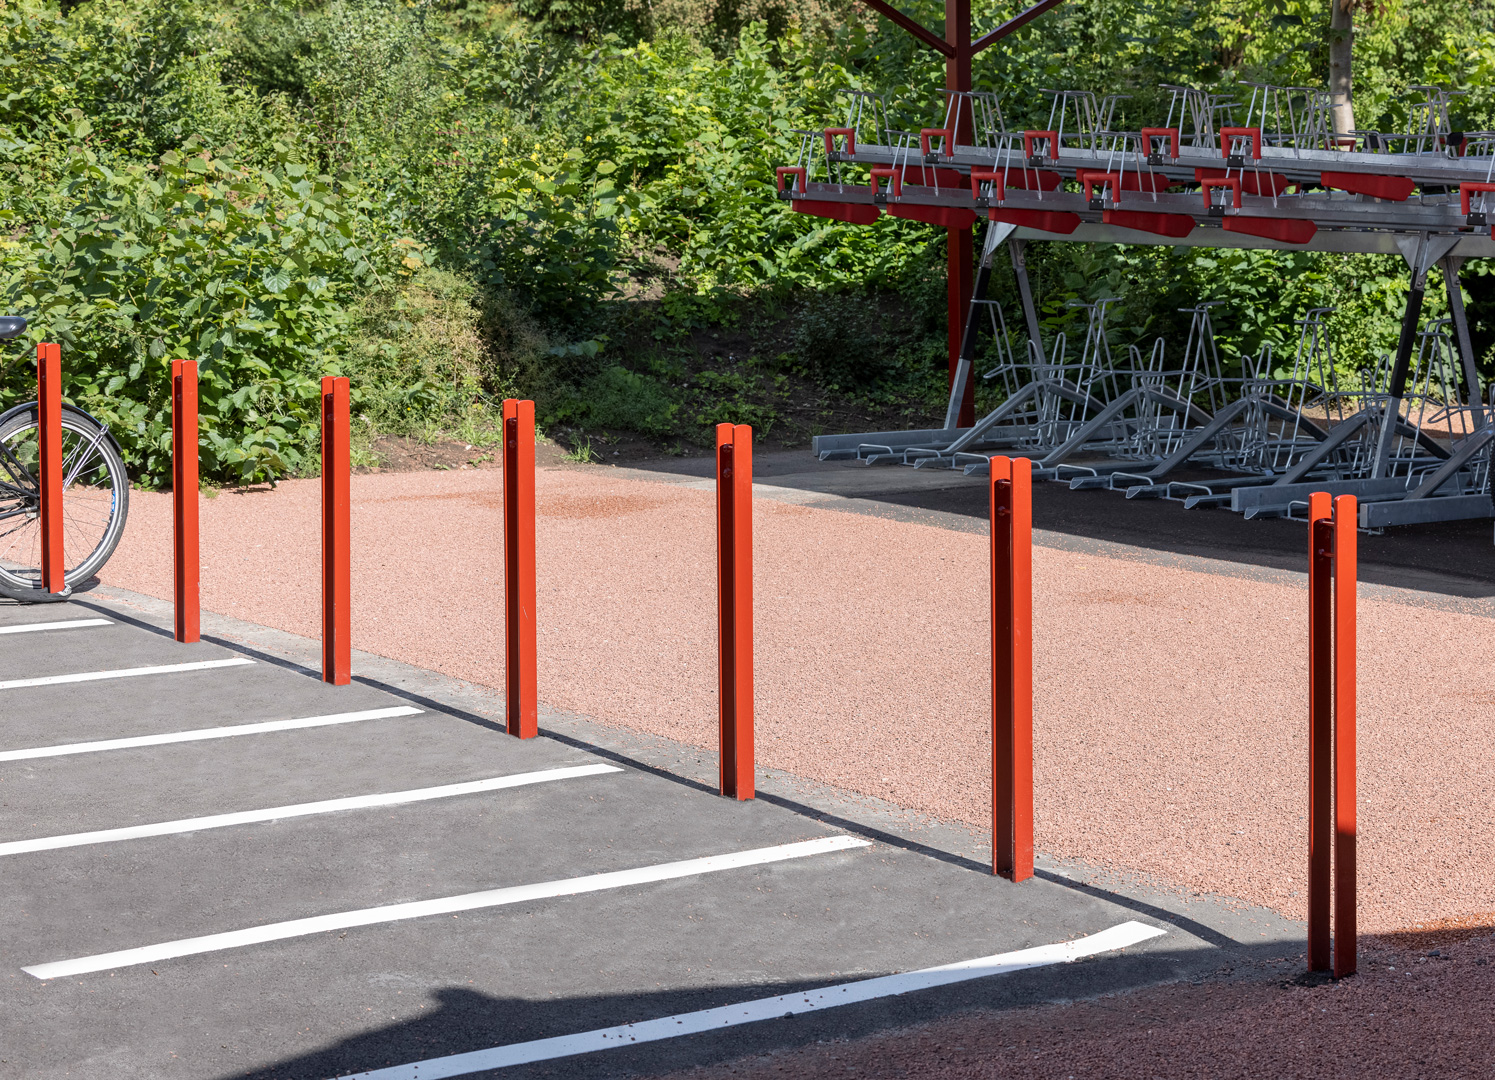 Red bollards for bicycle parking